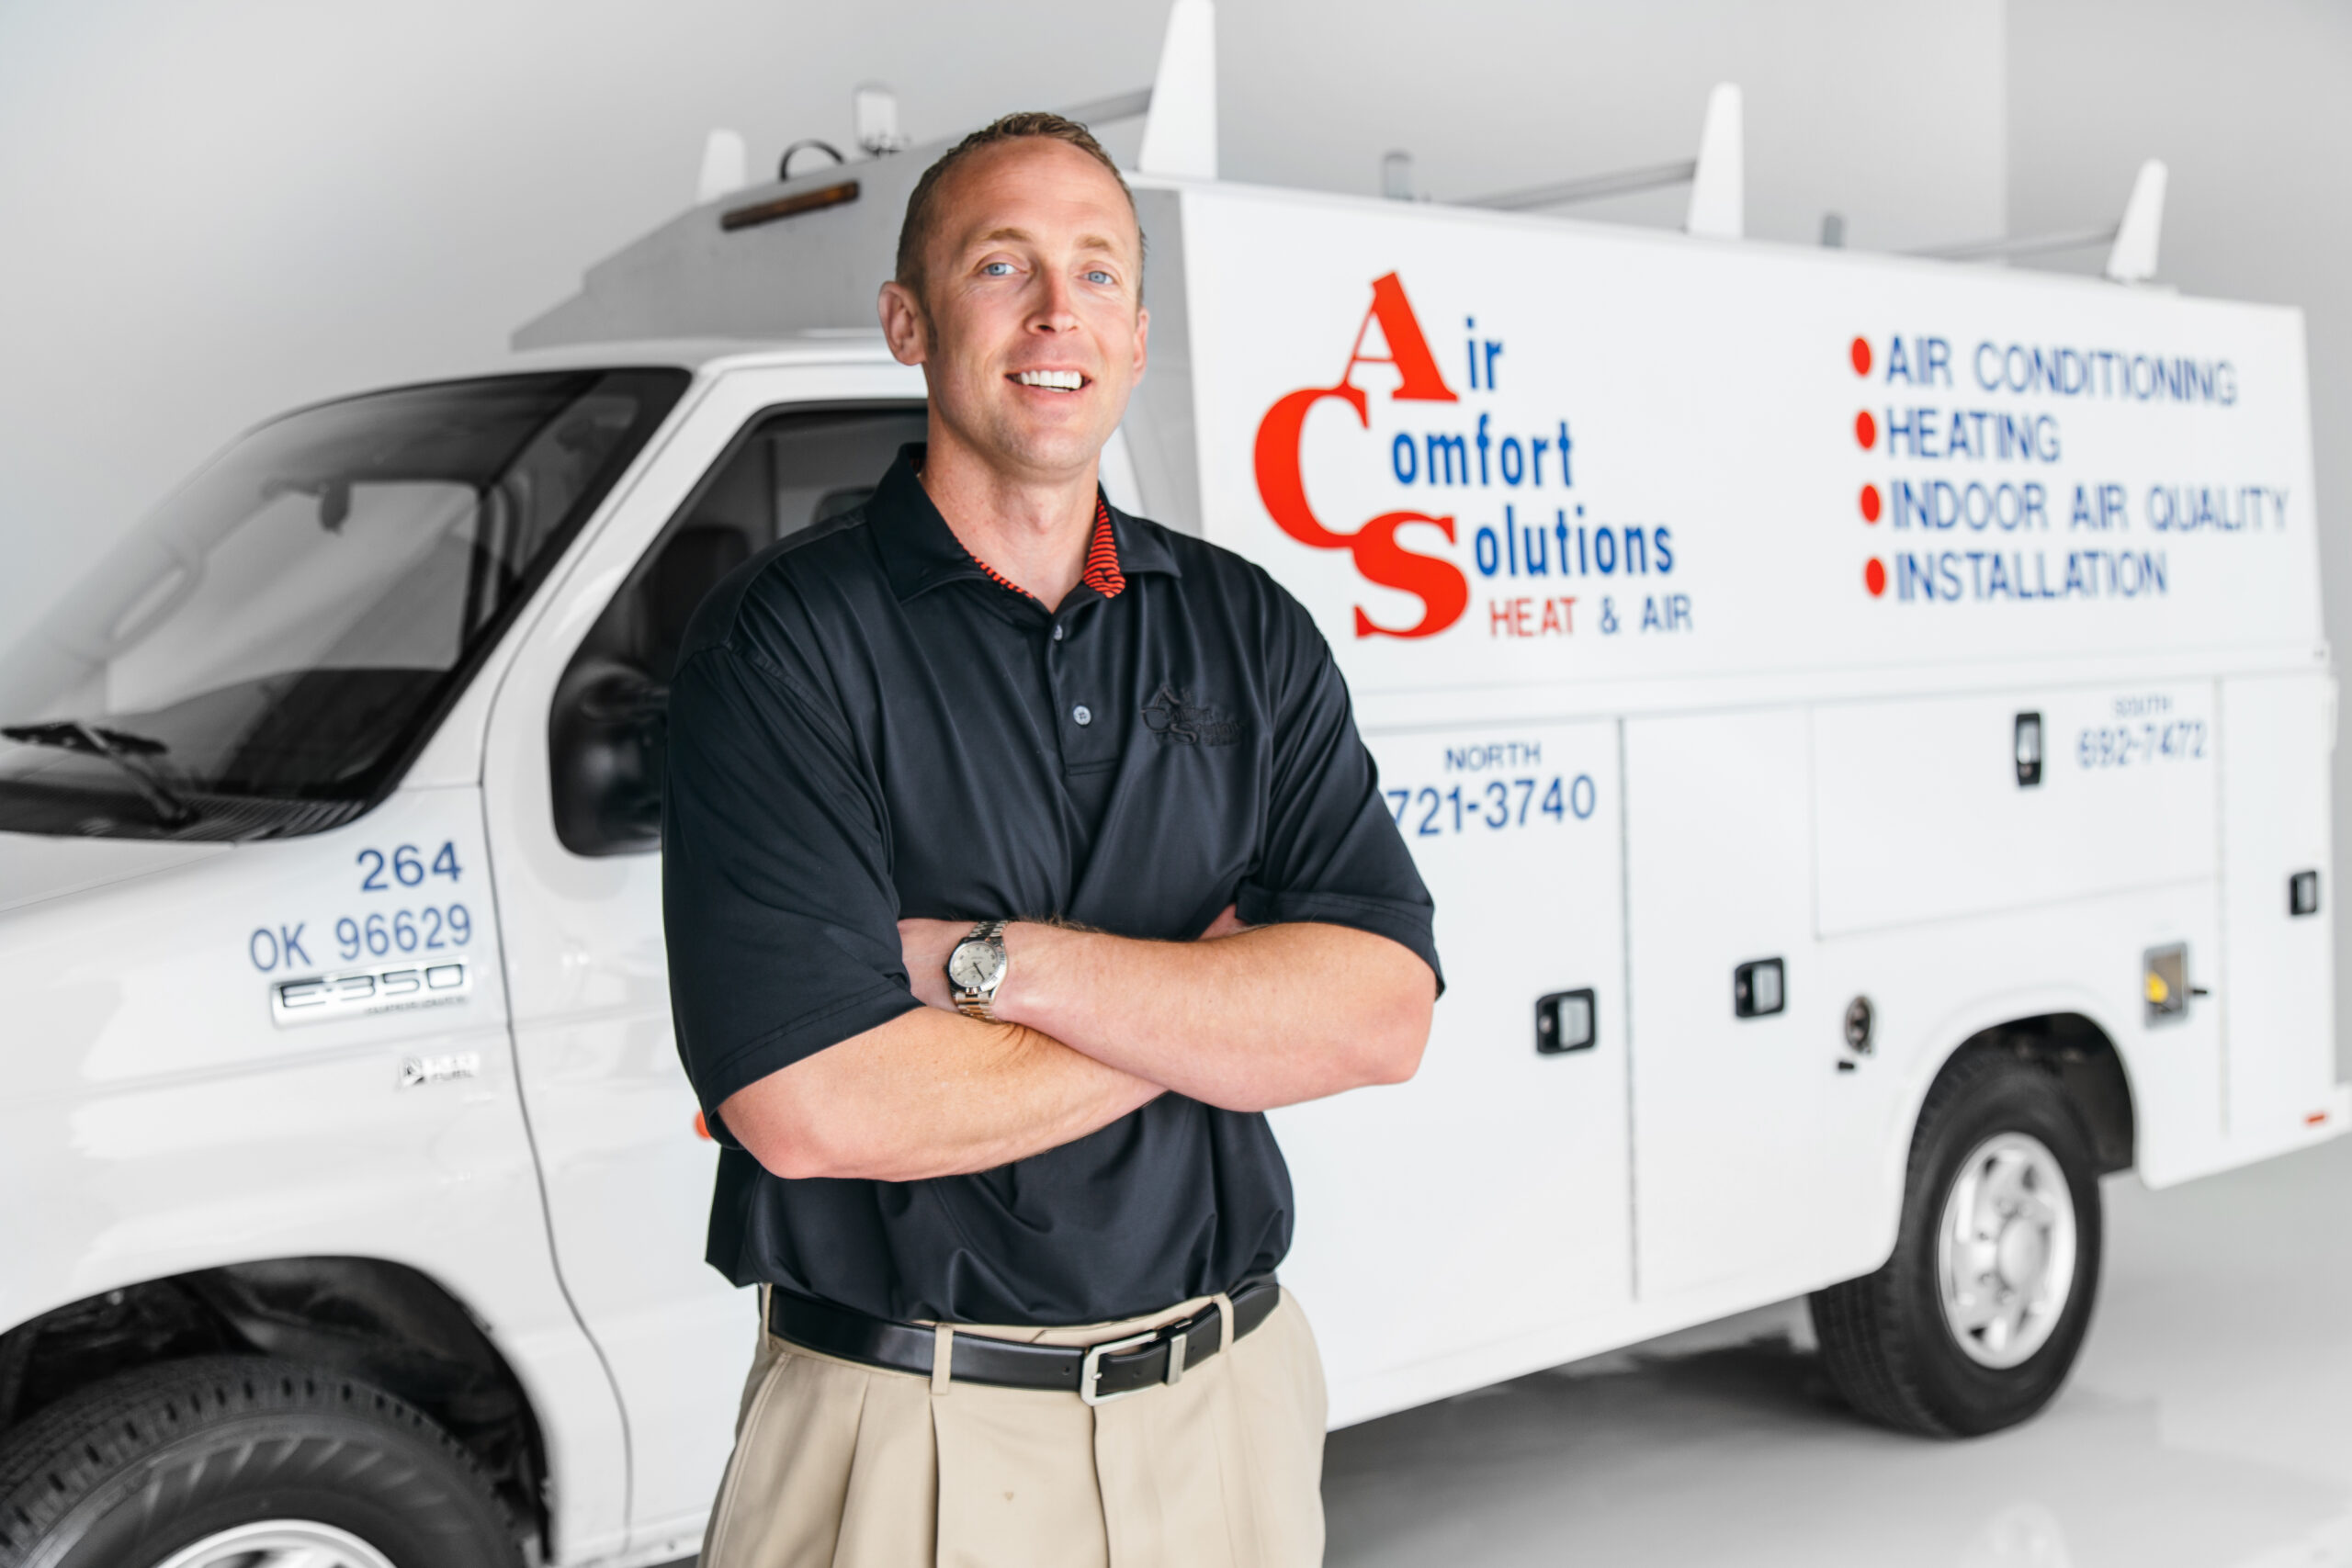 Jason White of Air Comfort Solutions